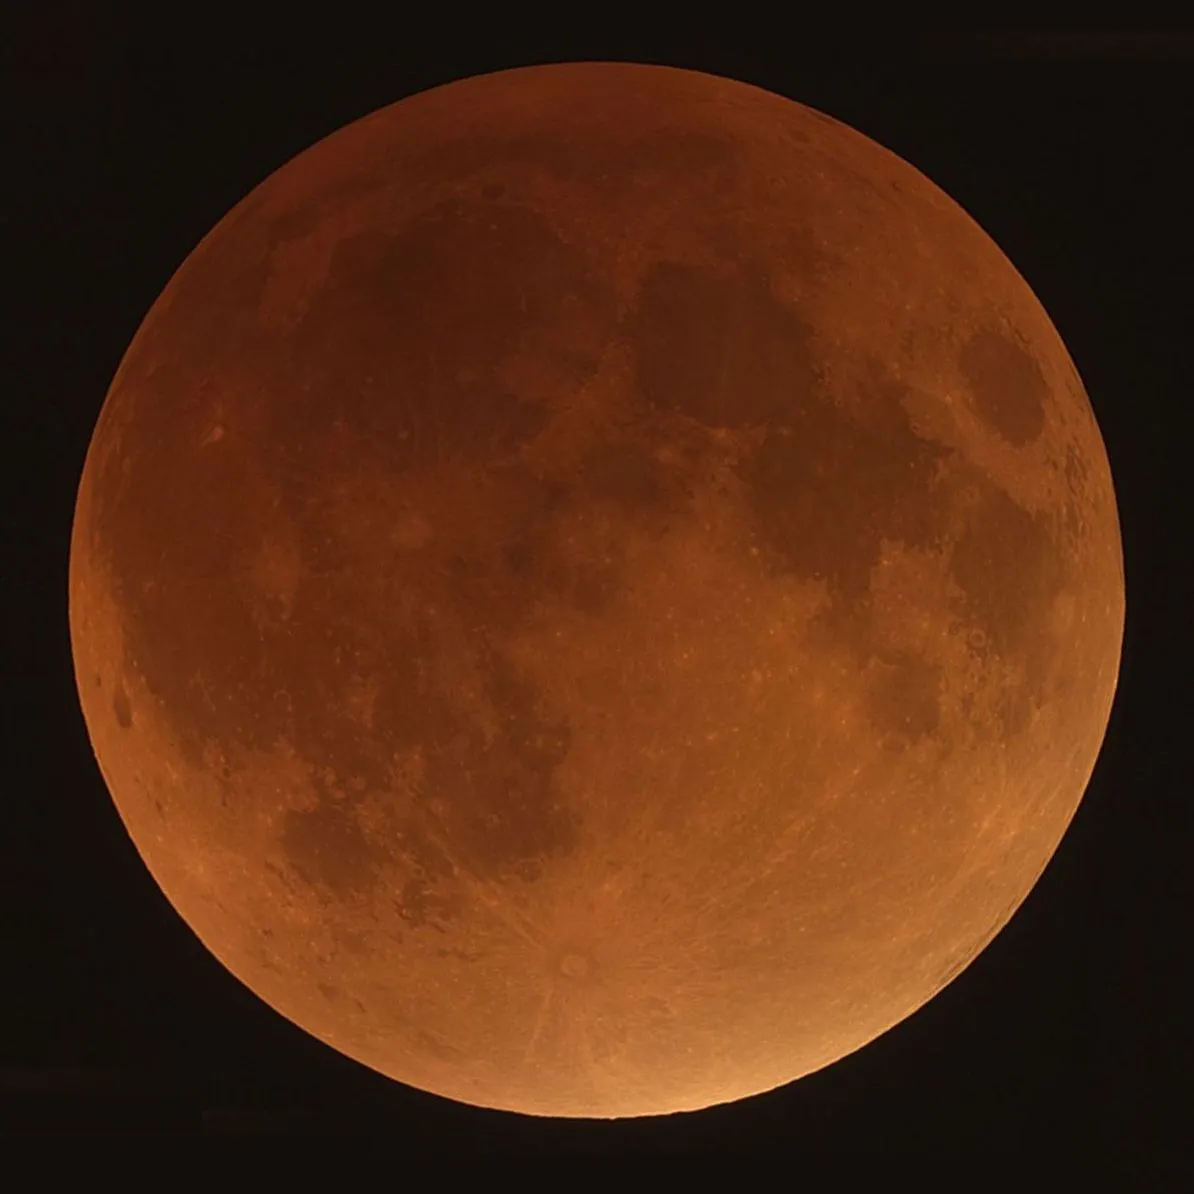 How to Photograph a Lunar Eclipse from Nikon